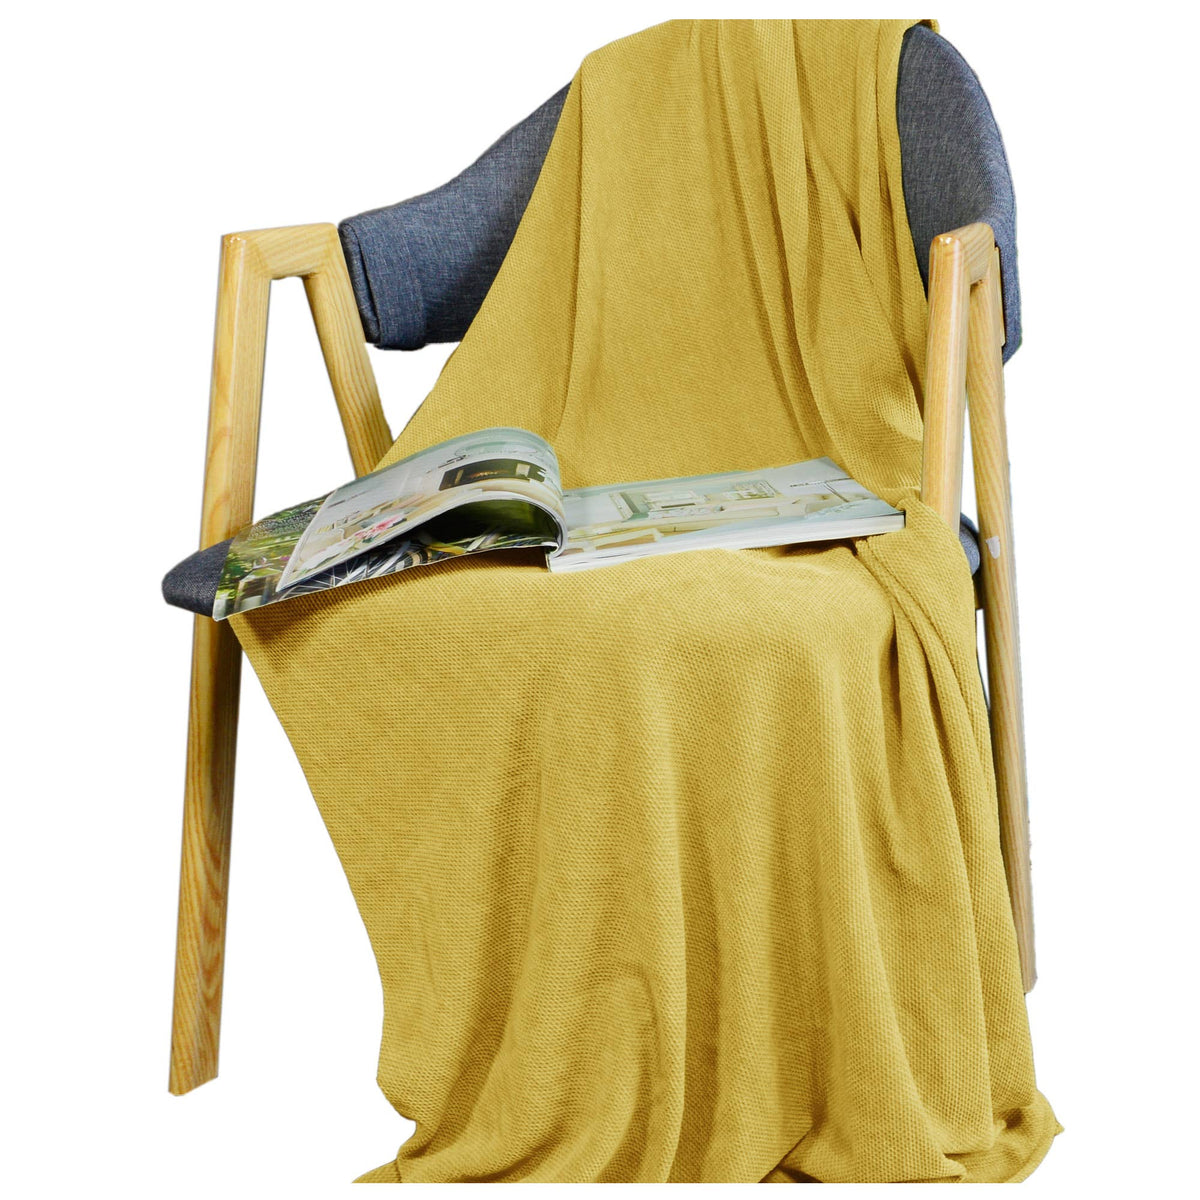 Knitted Microfiber Throw Blanket Plush Soft: Large-60x80 / Yellow